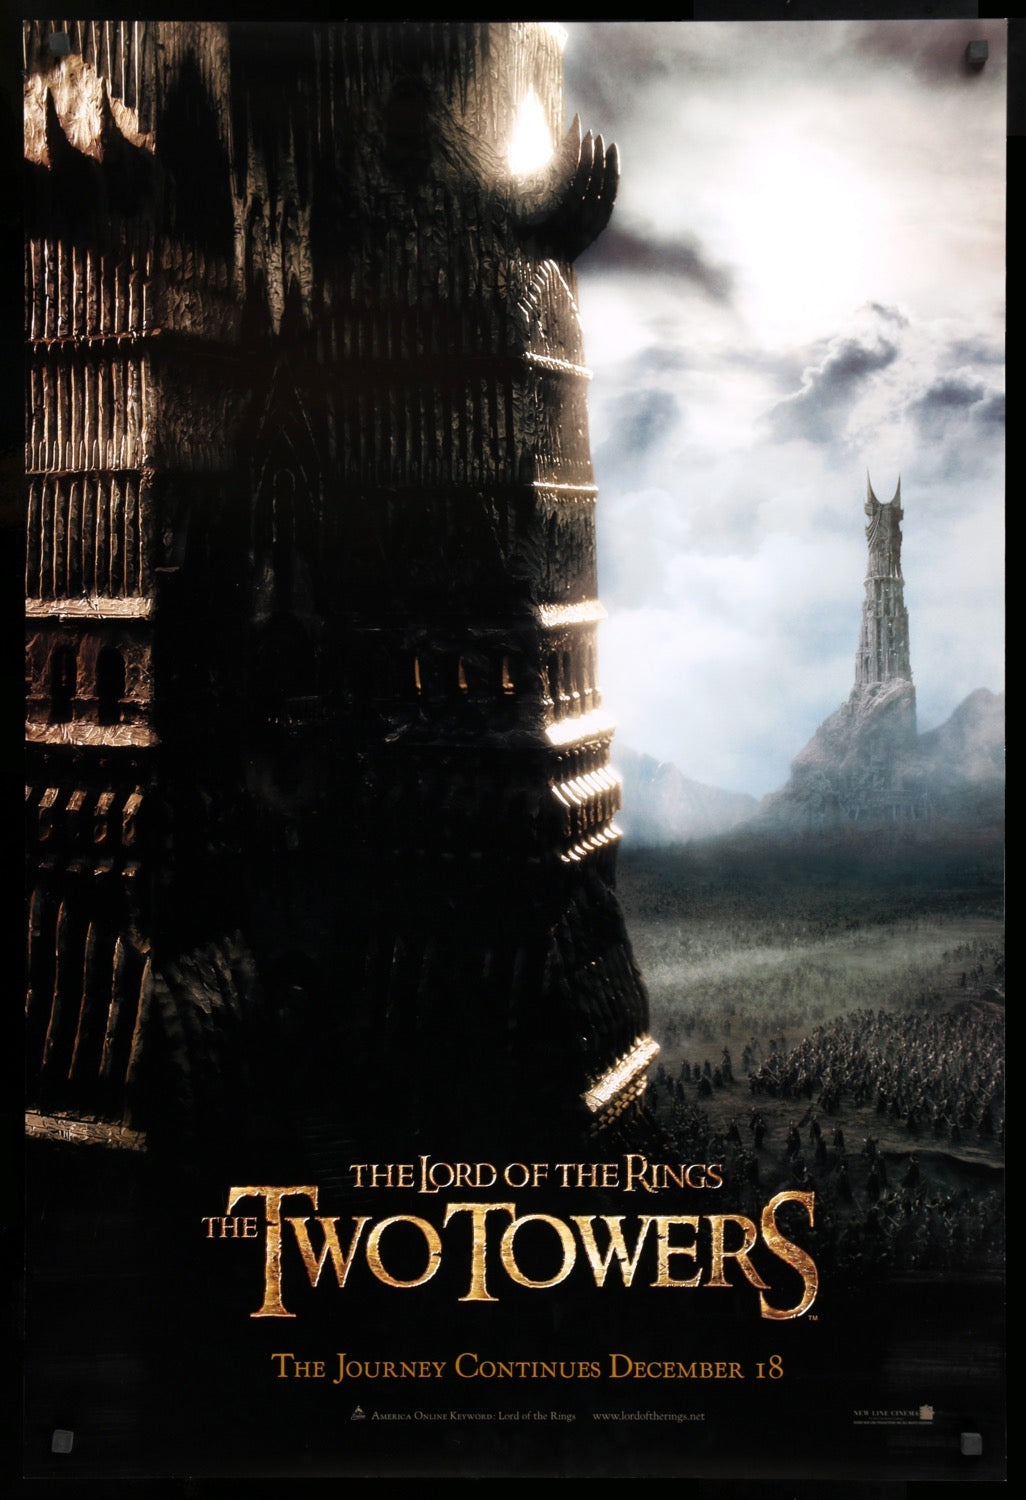 Lord of the Rings: The Two Towers (2002) original movie poster for sale at Original Film Art